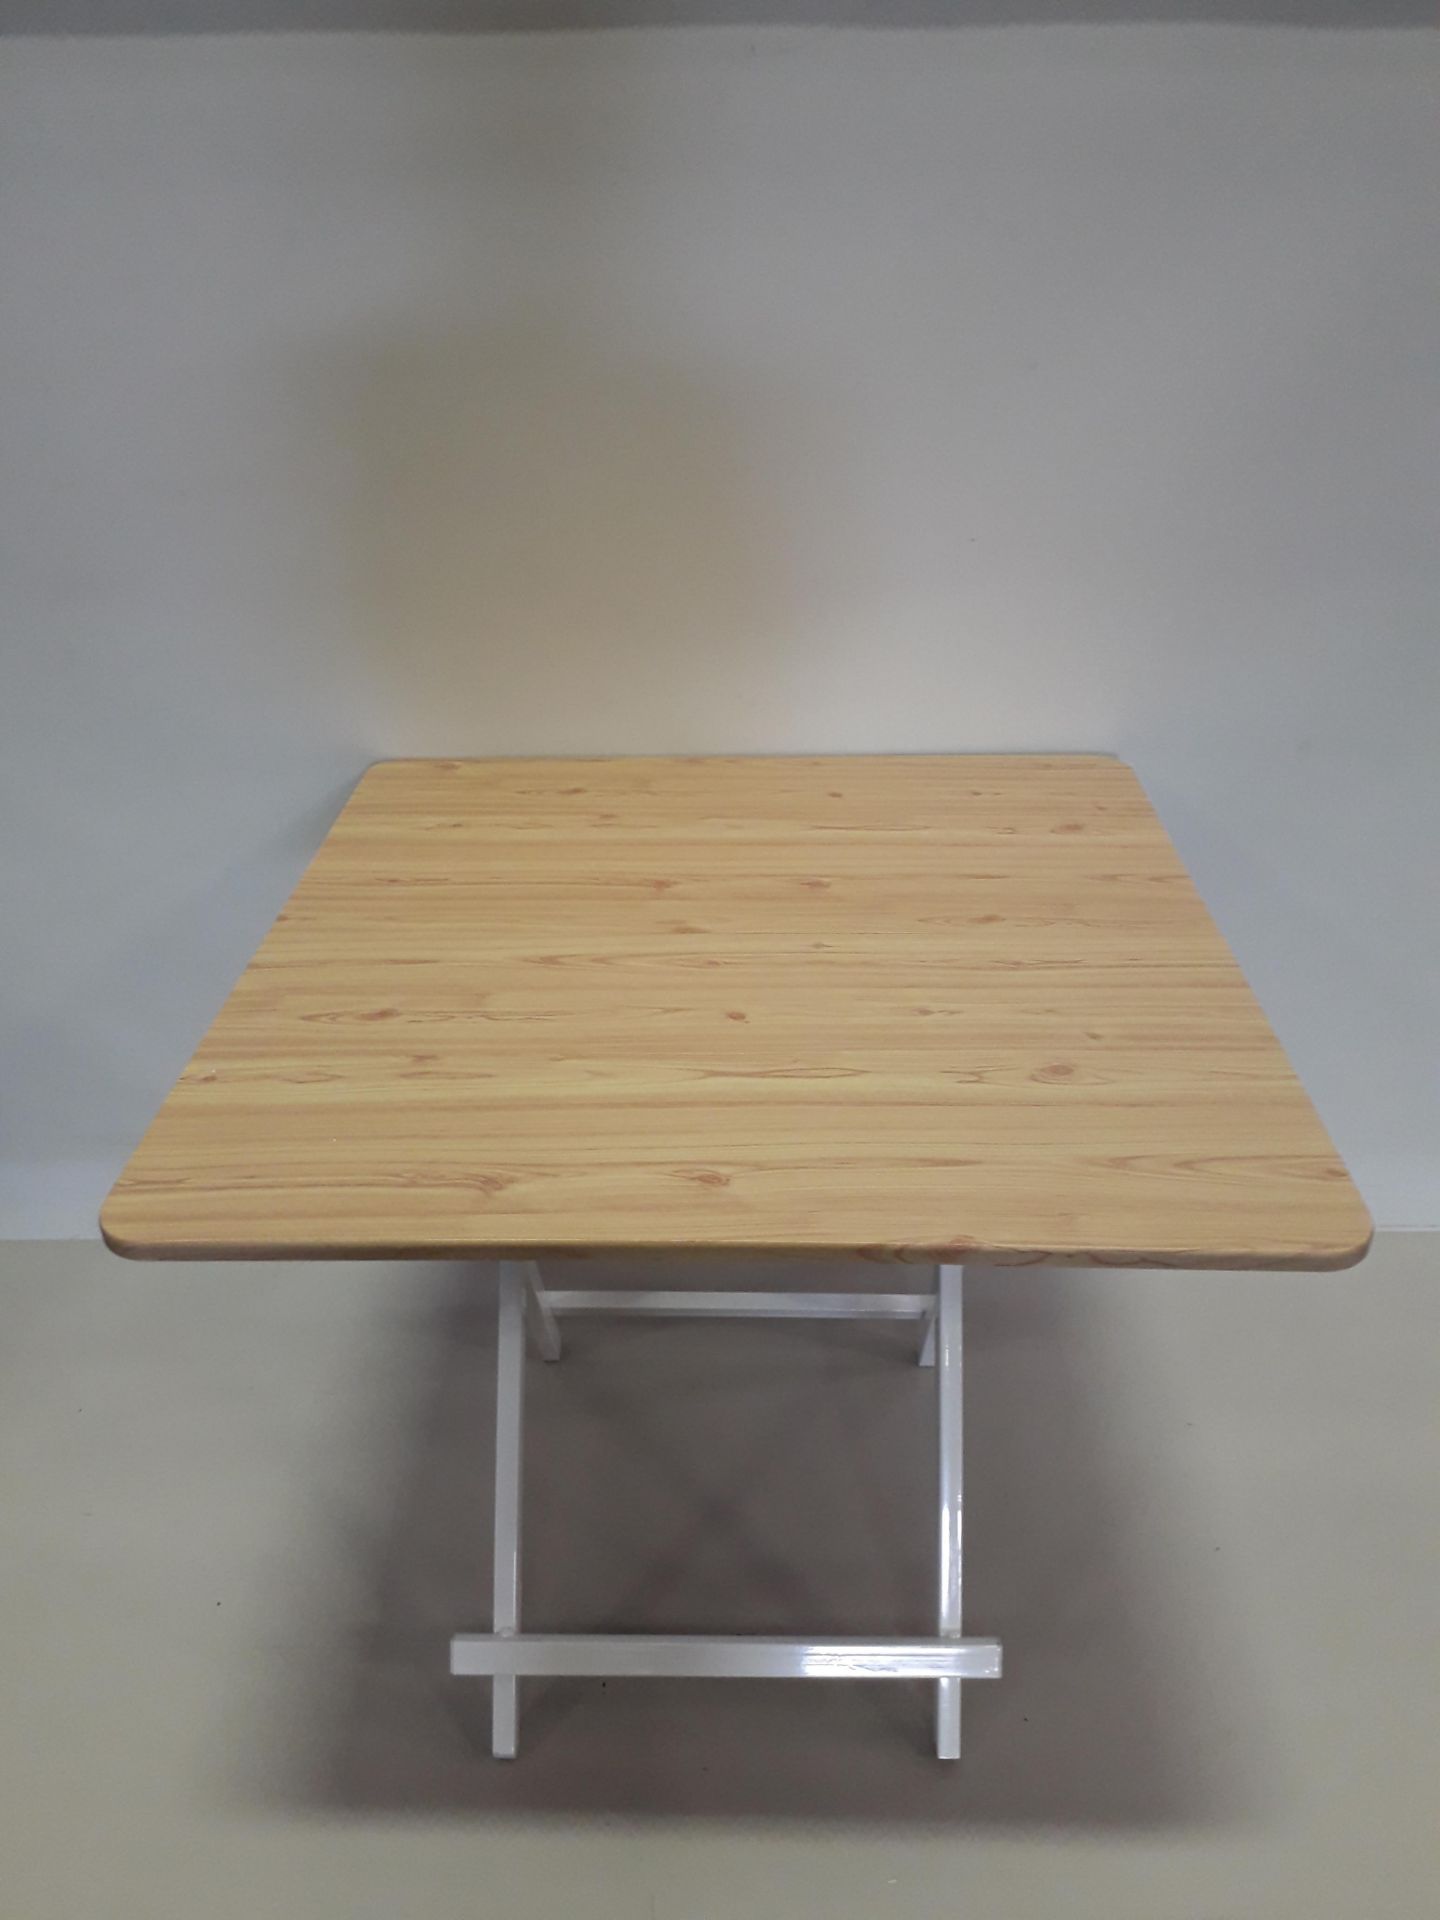 6 X LIGHT OAK COLOURED SQUARE TABLES SIZE - 80CM - (NOTE: FACTORY SECONDS SOME VENEER MAY BE